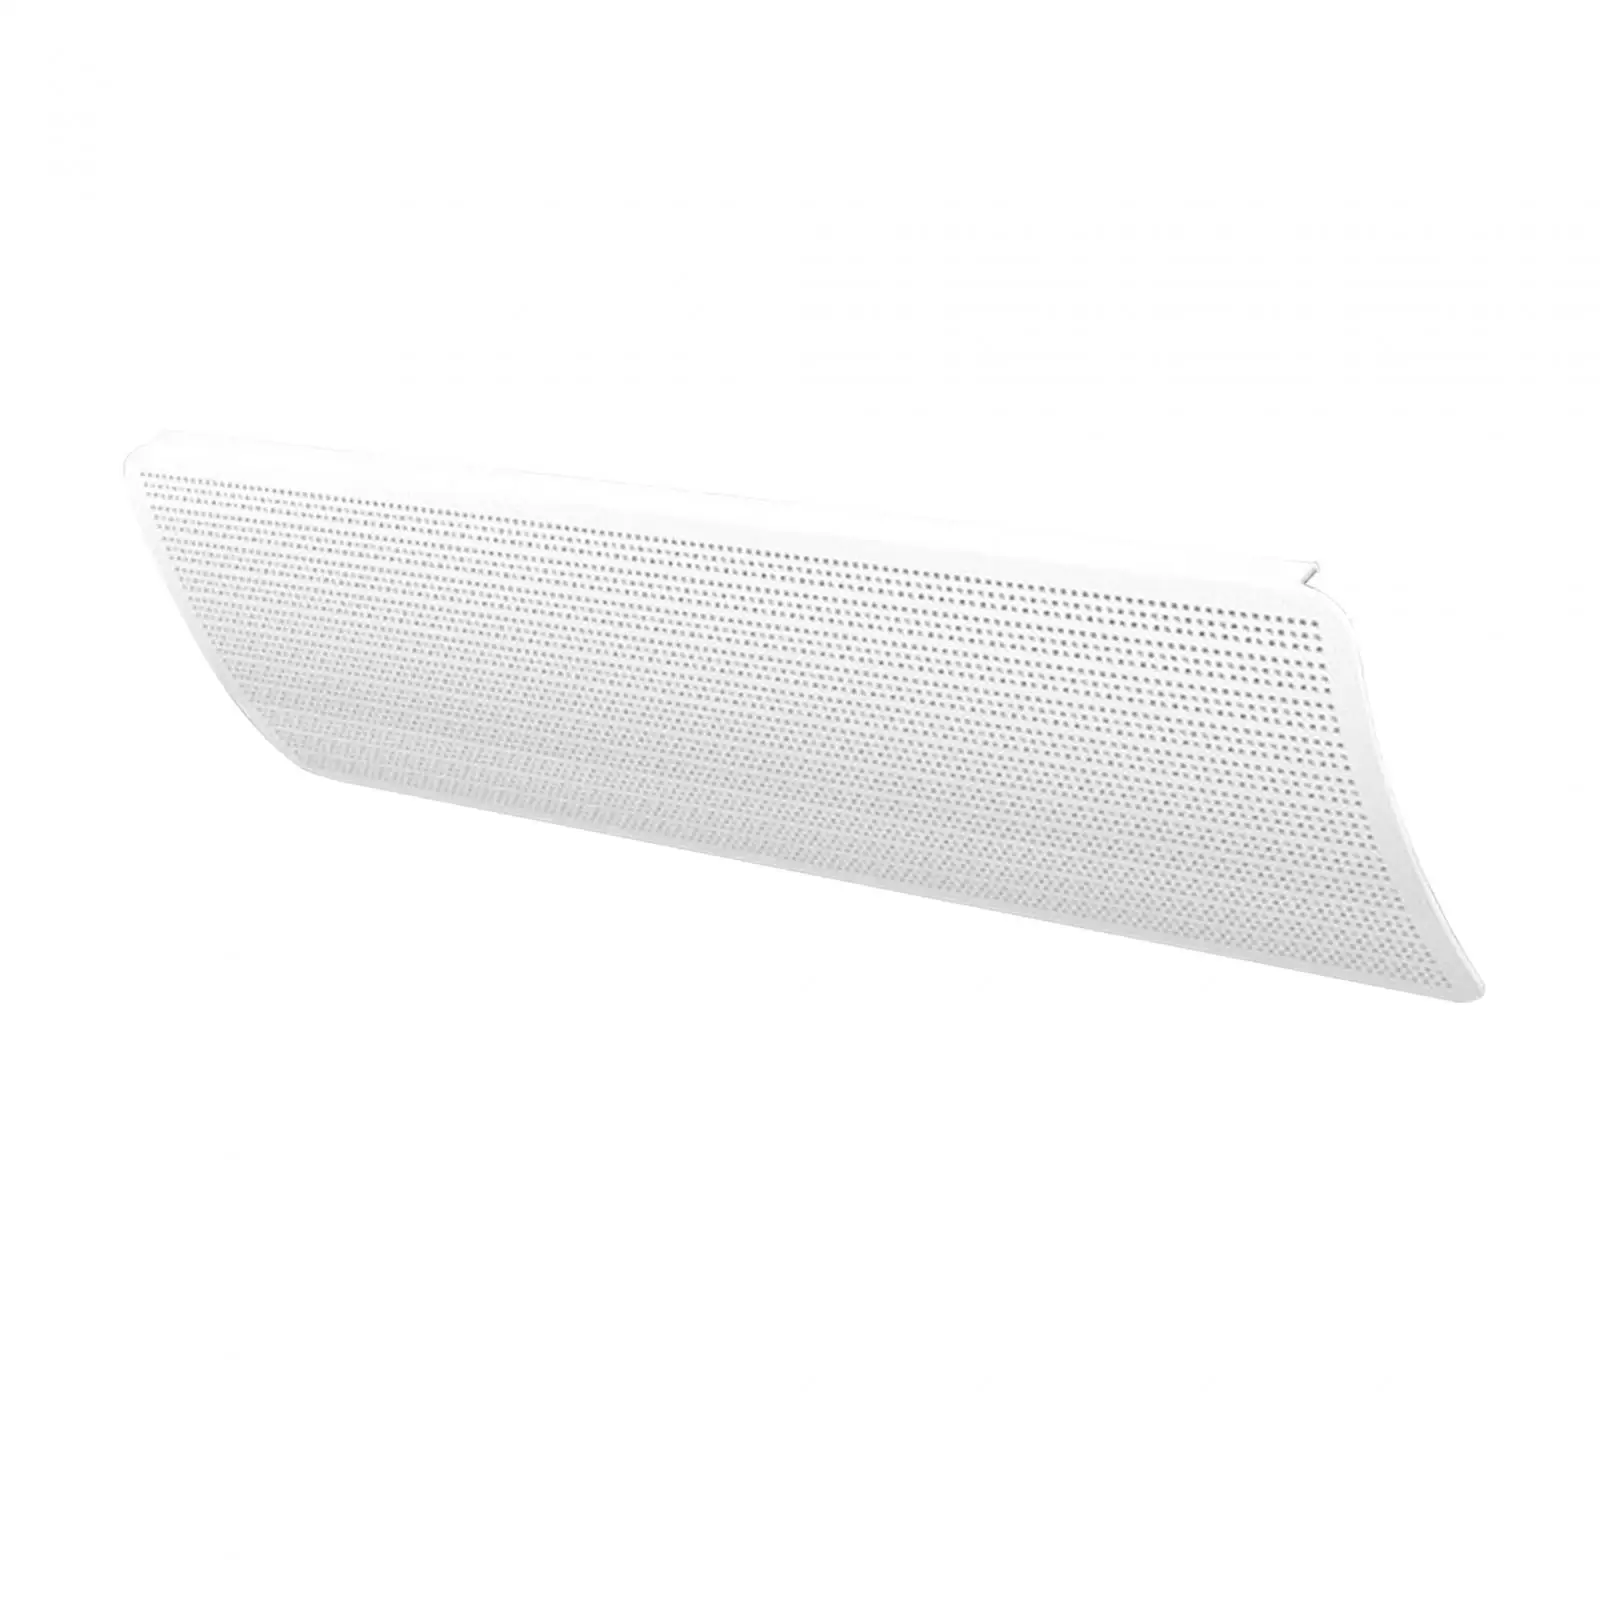 Central Air Conditioner Air Deflector Vent Deflector Side Accessory Adjusted up and Down Dense Hole Designed Wind Guide Cover